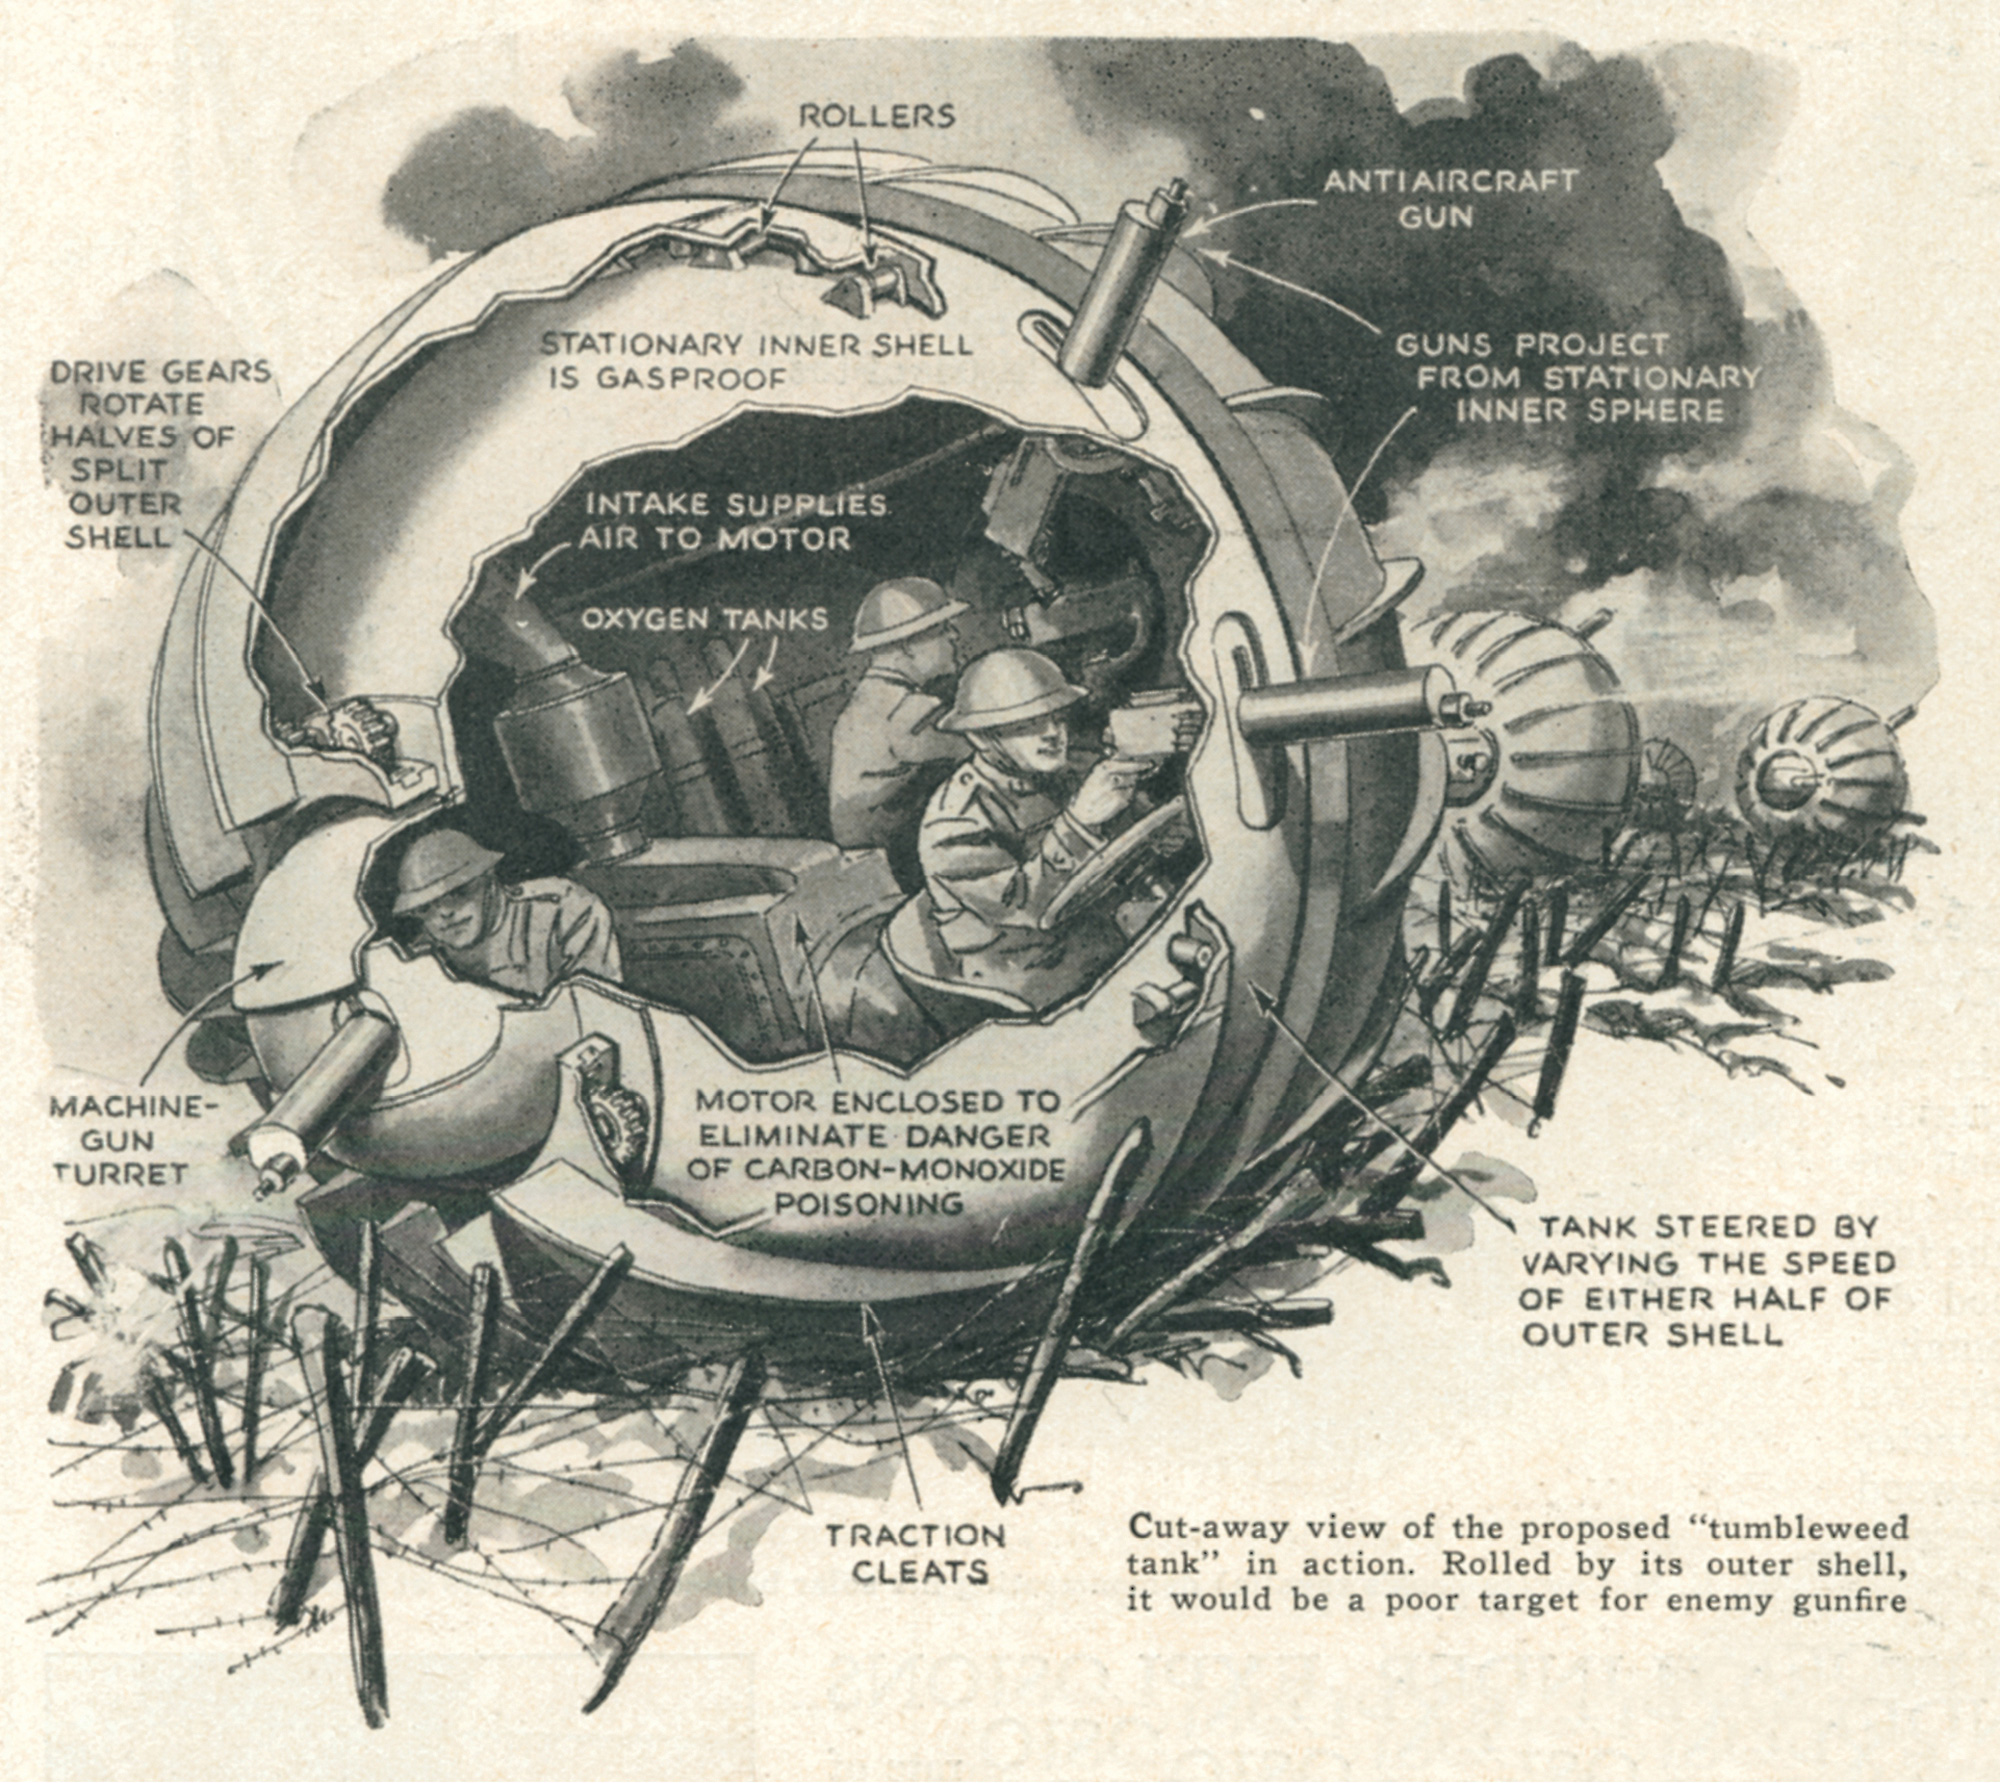 Illustration of the Tumbleweed Tank in battle from the July 1936 issue of Popular Science.